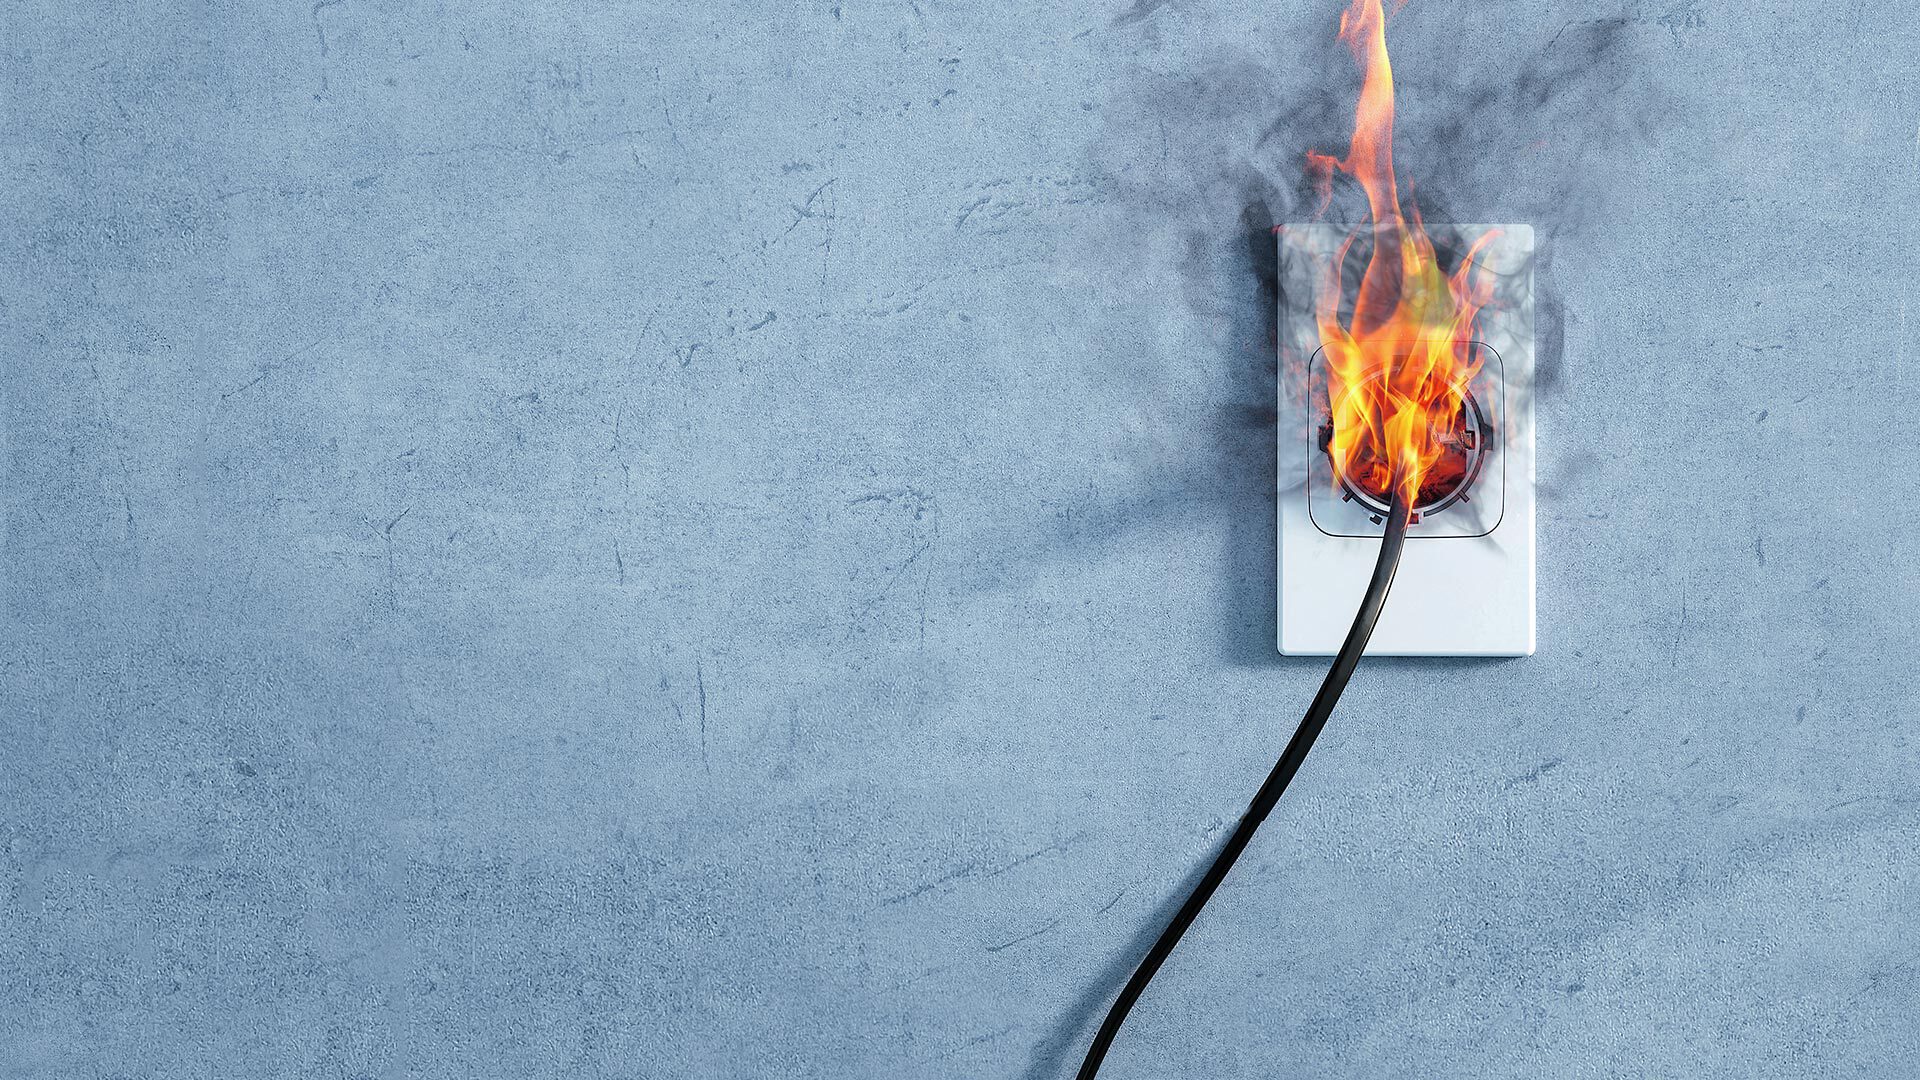 Power socket with plug dangerously on fire